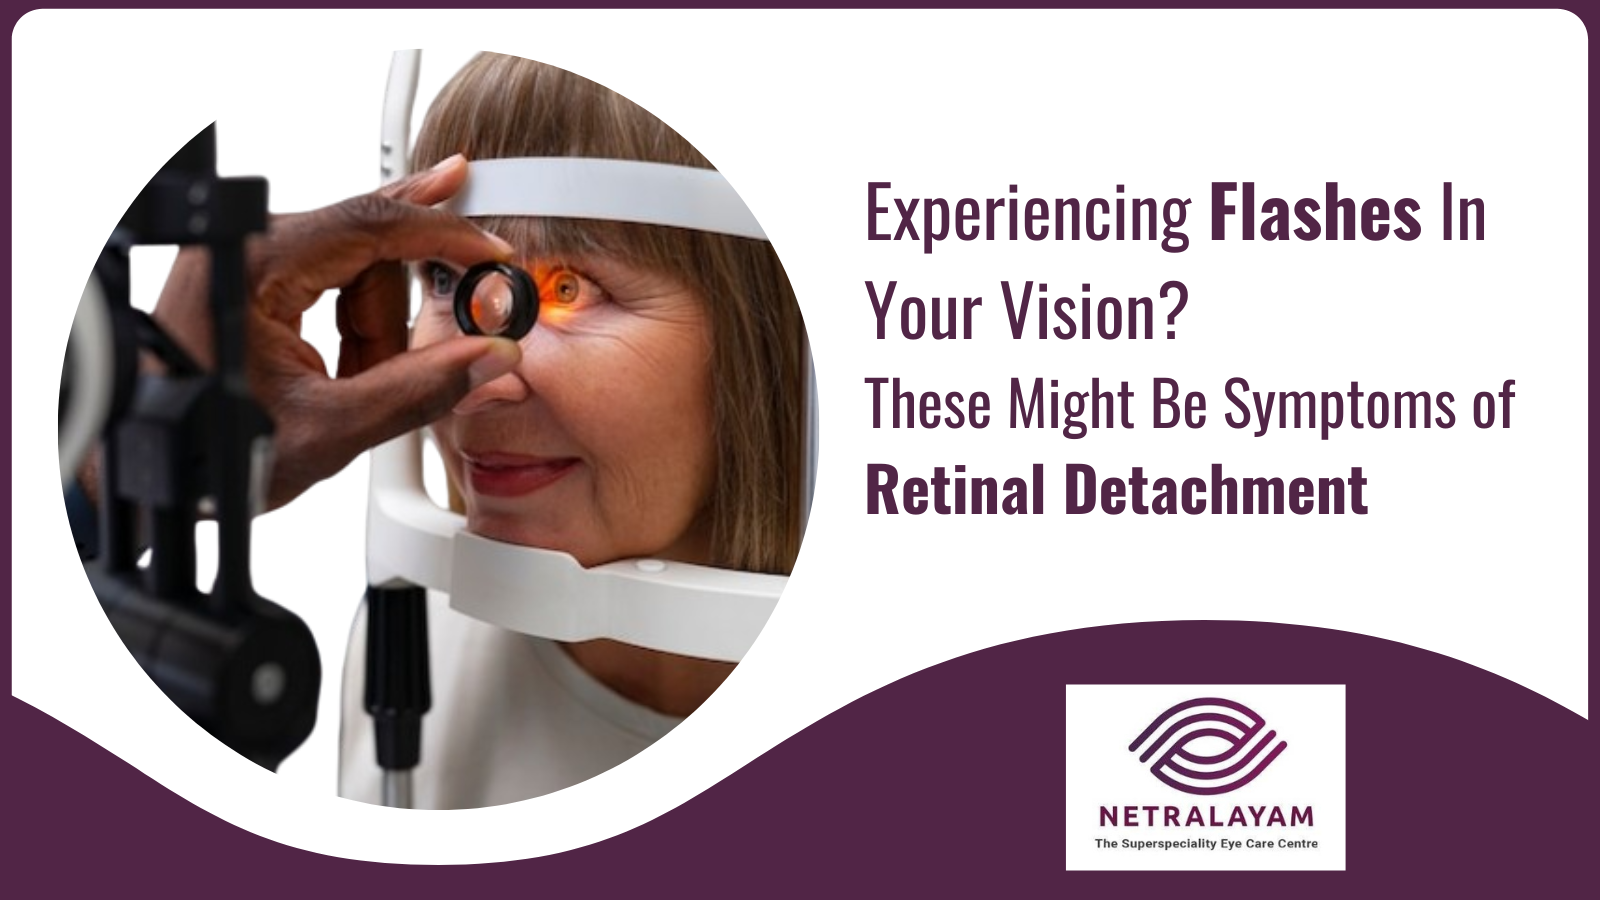 Experiencing Flashes In Your Vision? These Might Be Symptoms of Retinal Detachment